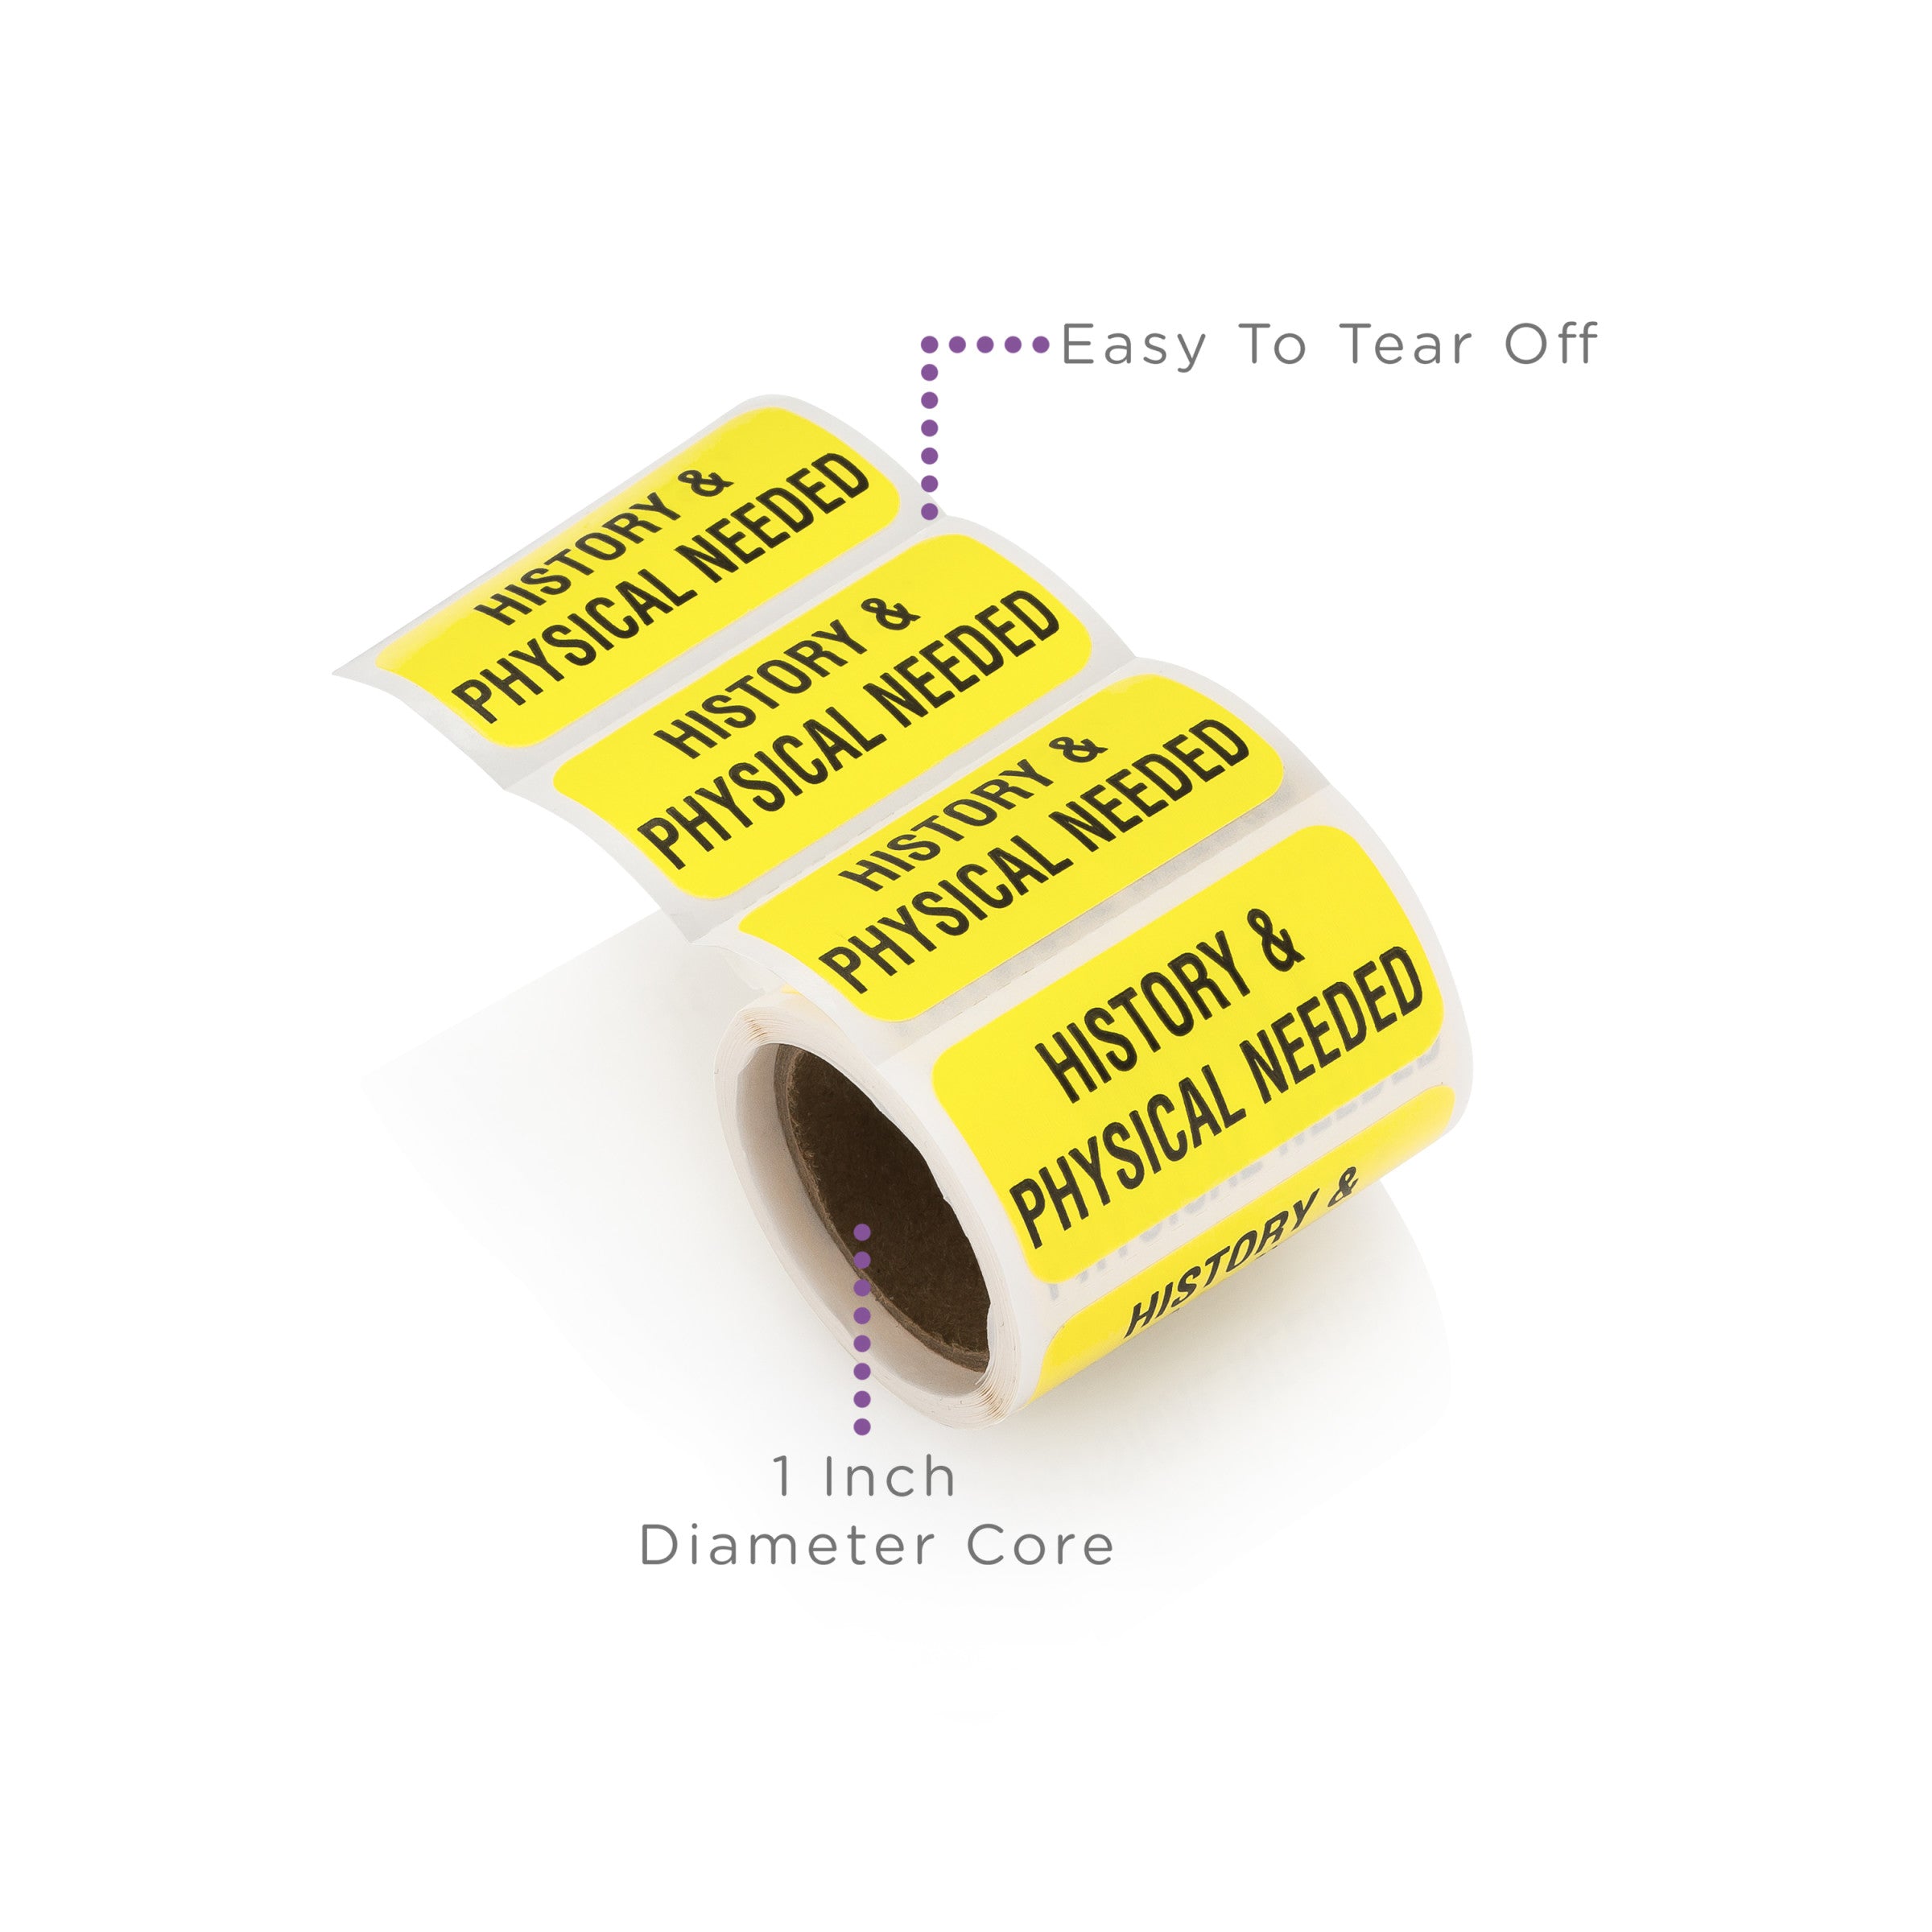 History & Physical Needed Alert and Instruction Labels, Yellow, W1.5" x H.75" (Roll of 100)